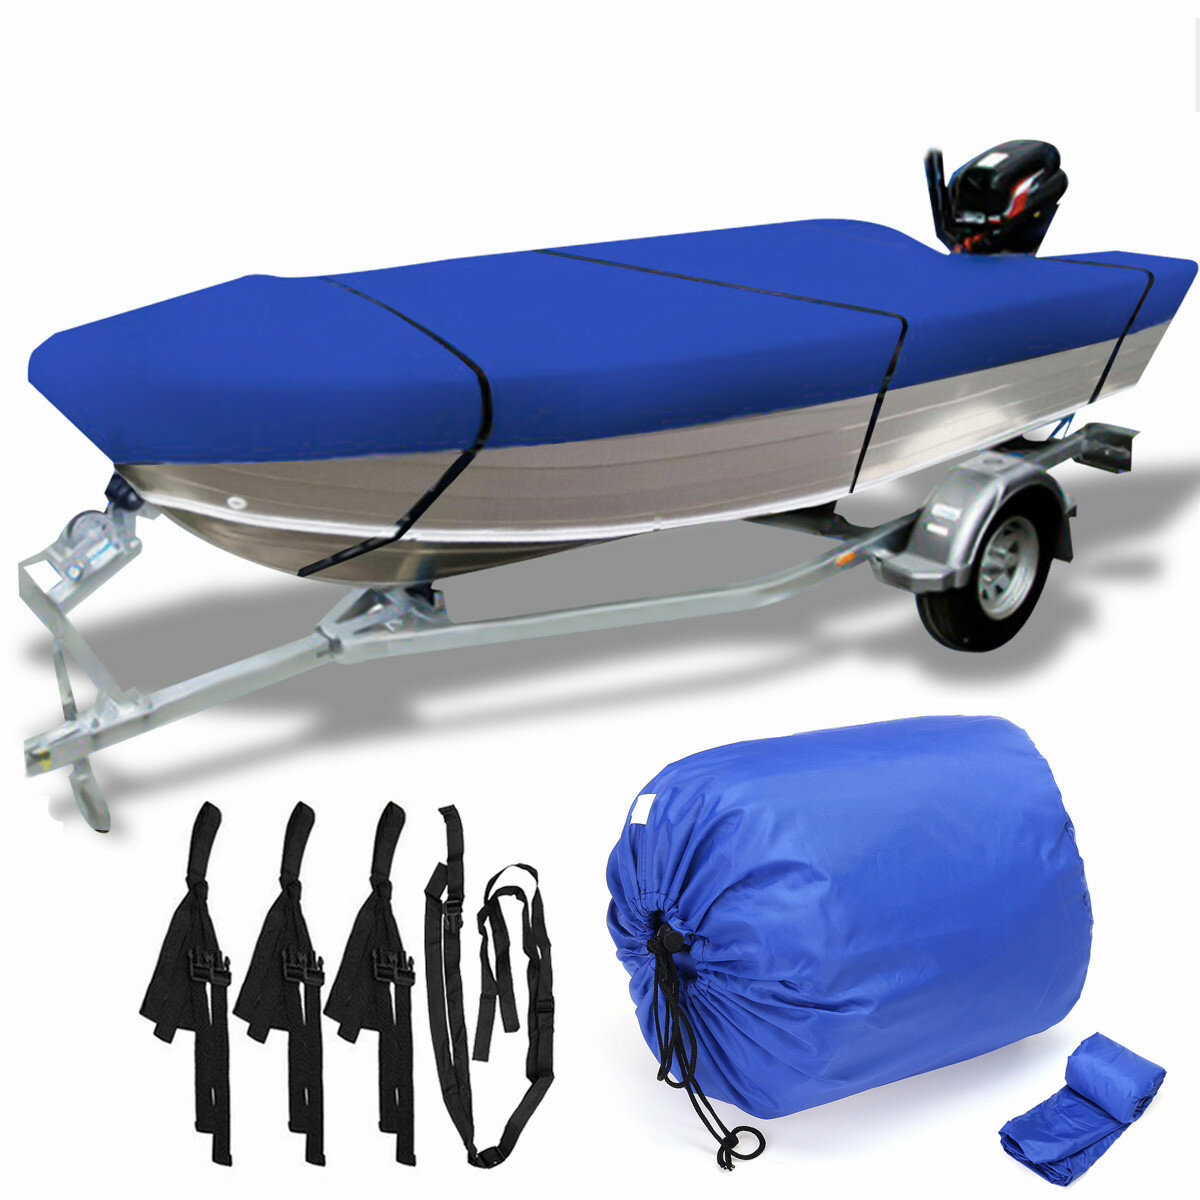 Image of Heavy Duty Open Boat Cover Trailerable Fishing Runabout Waterproof